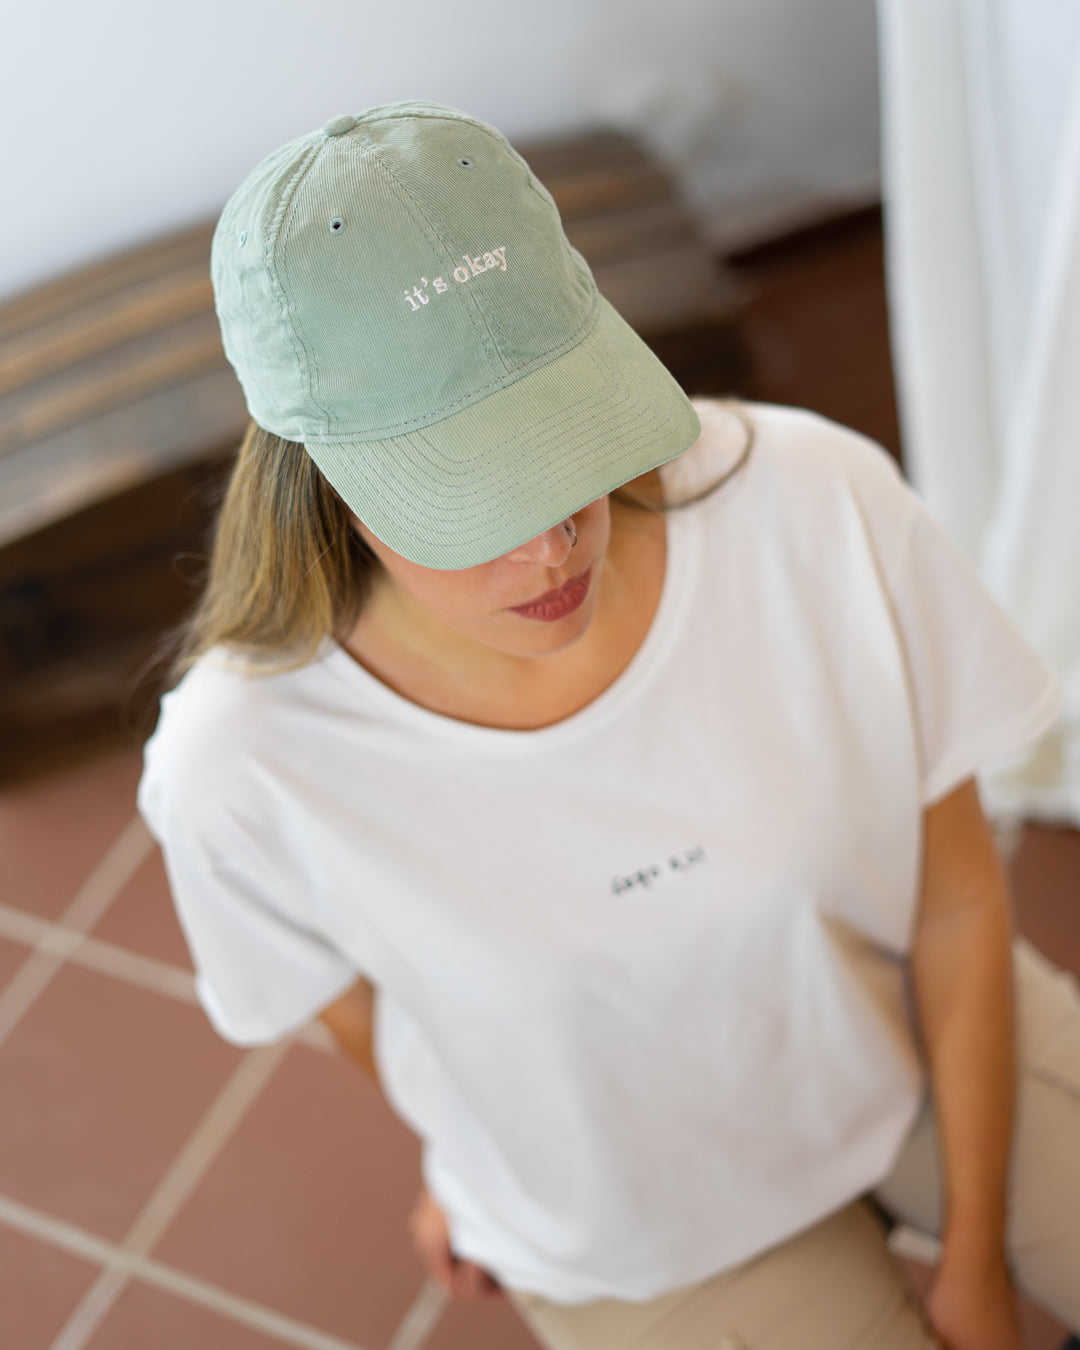 Wave cap | cotton needlecord corduroy in sage. Embroidered in Portugal. One size fits most | Wear it with pride. It's okay to be exactly who you are. Pt: Boné algodão de pala em bombazine de cor salvia, tamanha ajustável. Image: Wave cap on women wearing word search organic t-shirts from it's okay